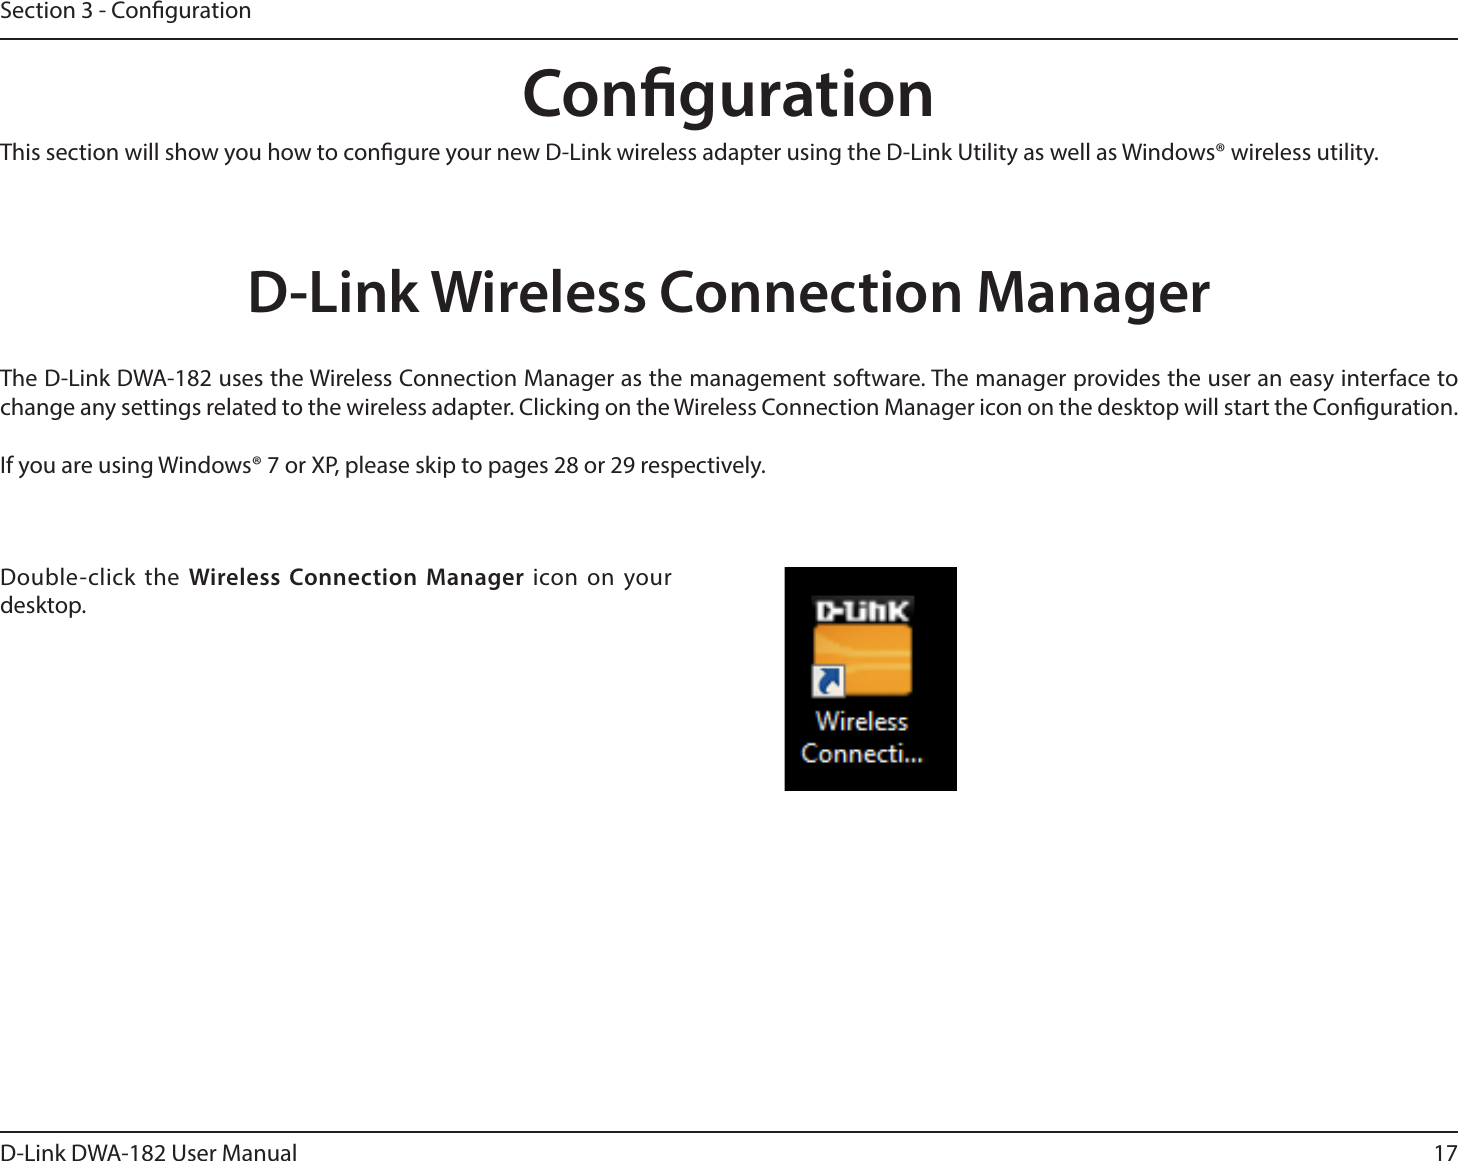 17D-Link DWA-182 User ManualSection 3 - CongurationCongurationThis section will show you how to congure your new D-Link wireless adapter using the D-Link Utility as well as Windows® wireless utility.D-Link Wireless Connection ManagerThe D-Link DWA-182 uses the Wireless Connection Manager as the management software. The manager provides the user an easy interface to change any settings related to the wireless adapter. Clicking on the Wireless Connection Manager icon on the desktop will start the Conguration.*GZPVBSFVTJOH8JOEPXT¥PS91QMFBTFTLJQUPQBHFTPSSFTQFDUJWFMZDouble-click the Wireless Connection Manager icon on your desktop.